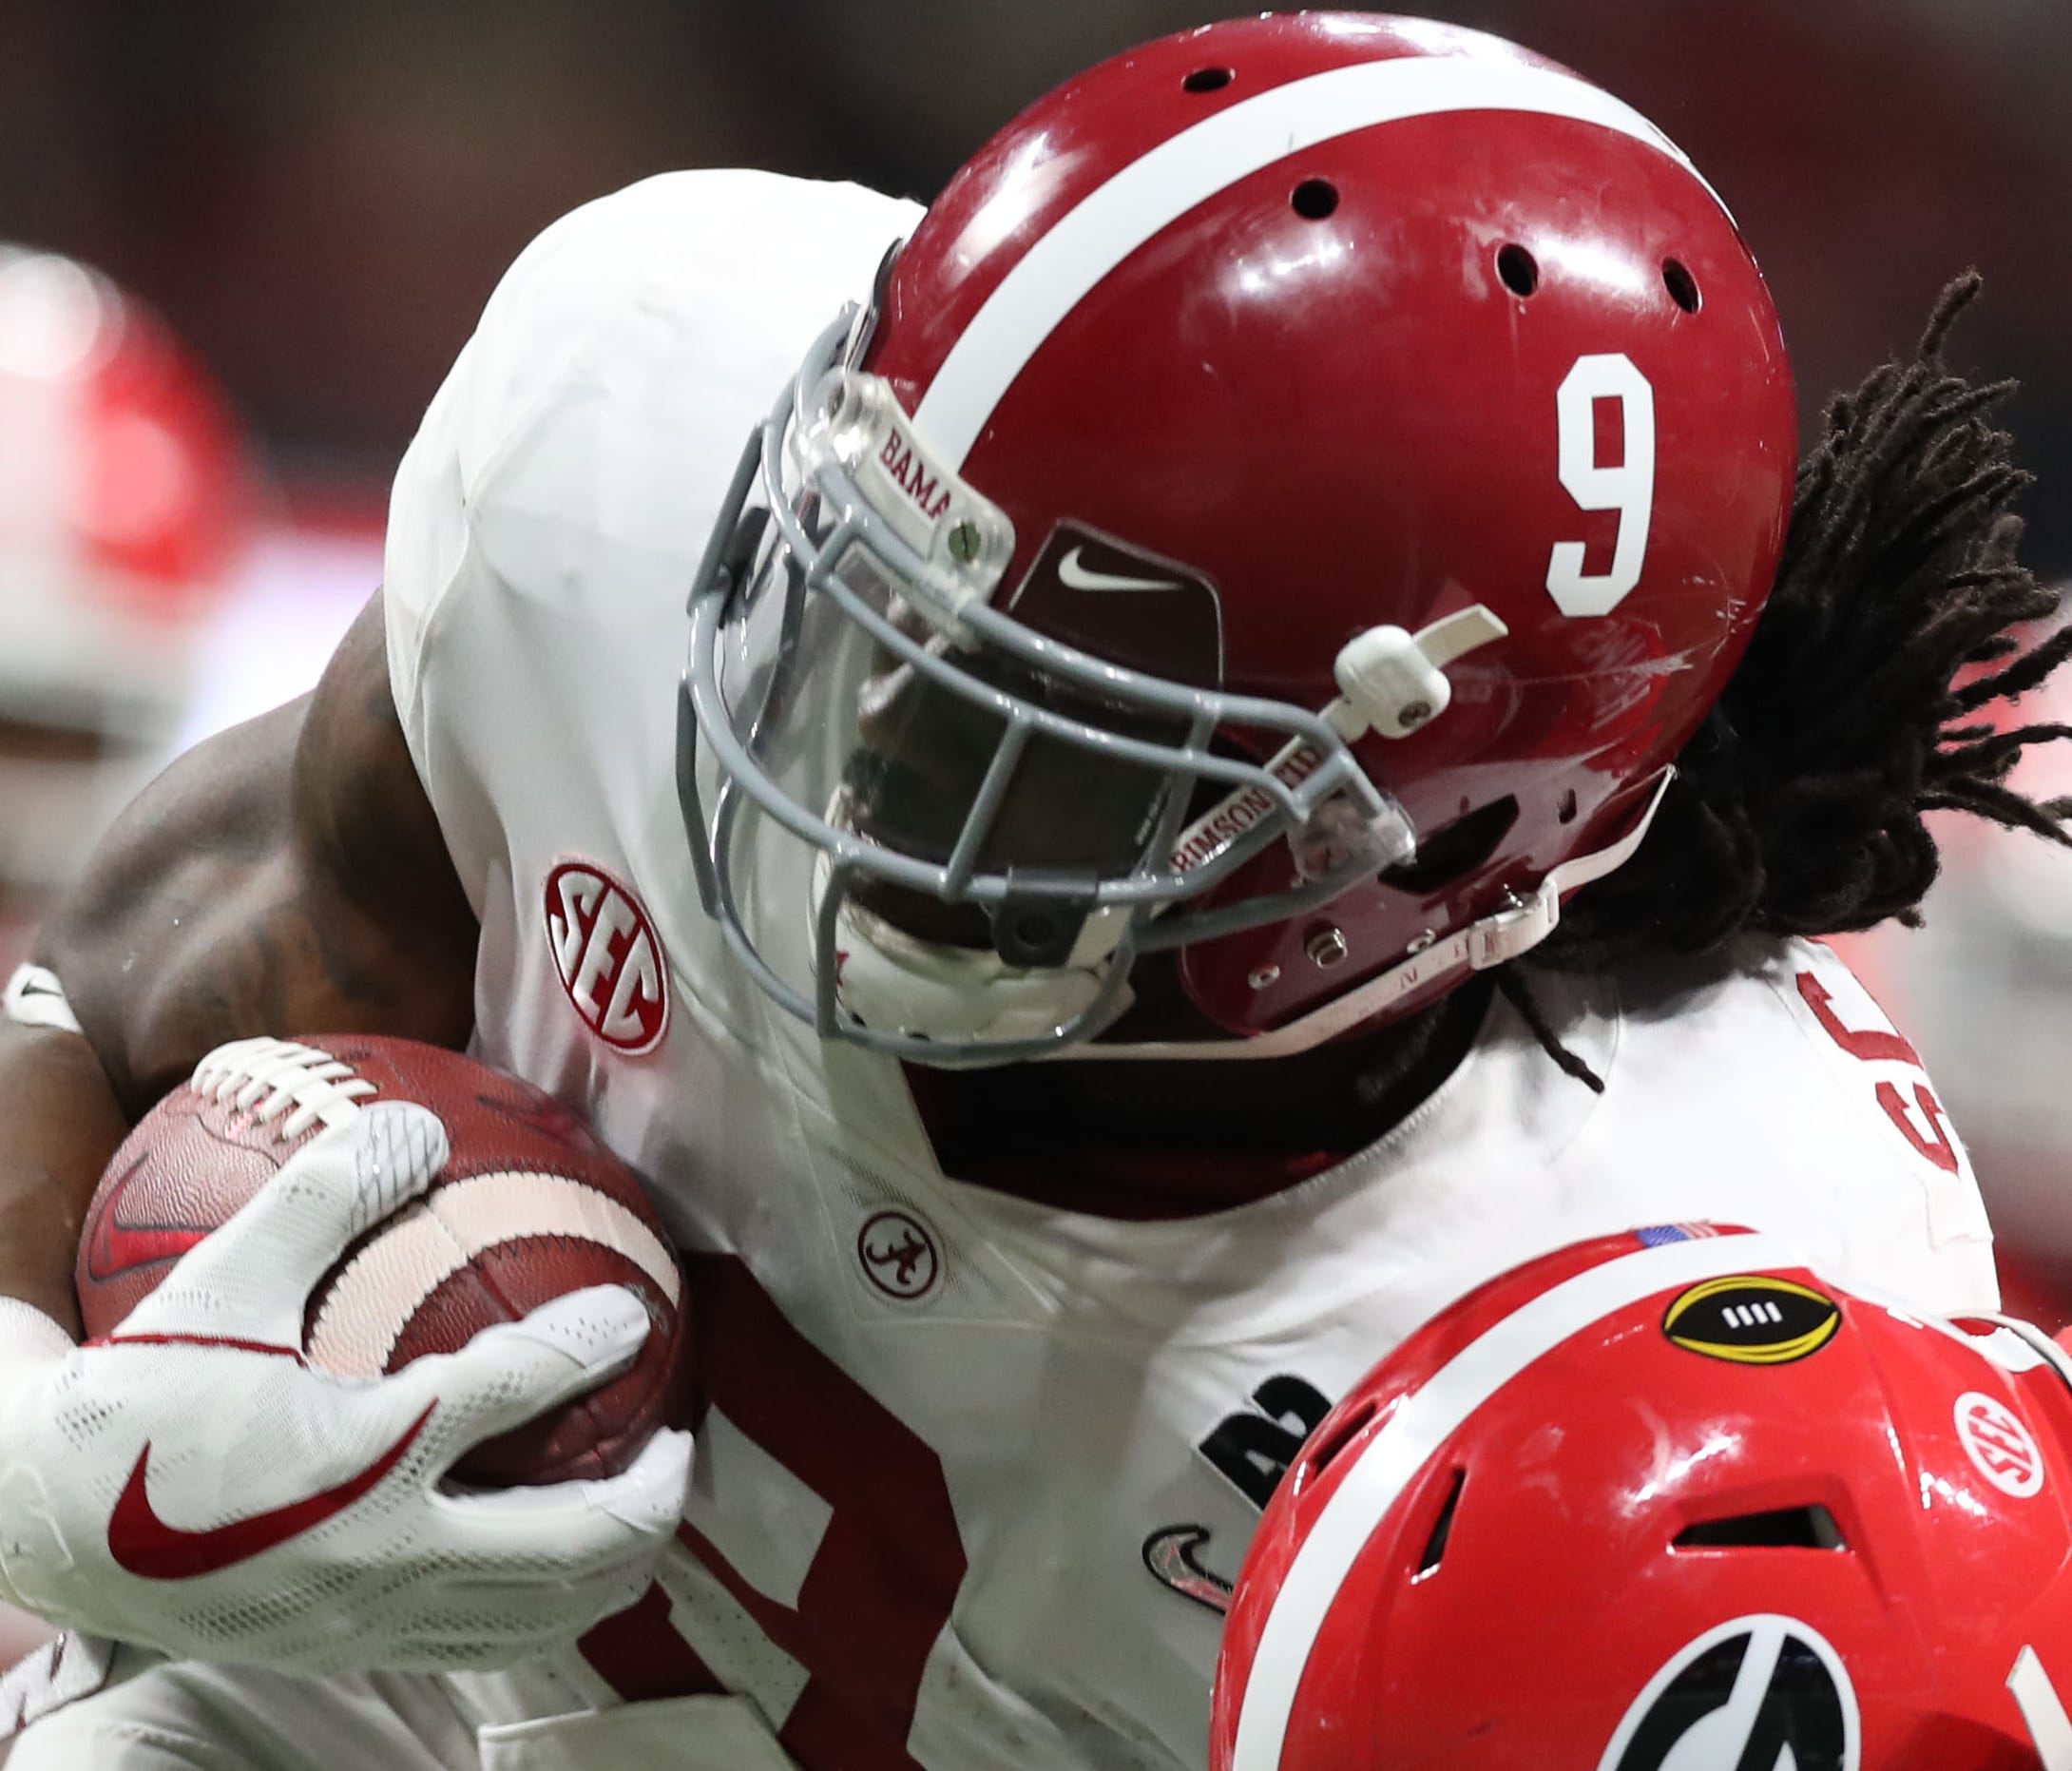 Alabama running back Bo Scarbrough voiced his disapproval of President Trump while walking out of the tunnel before Monday's national championship game.